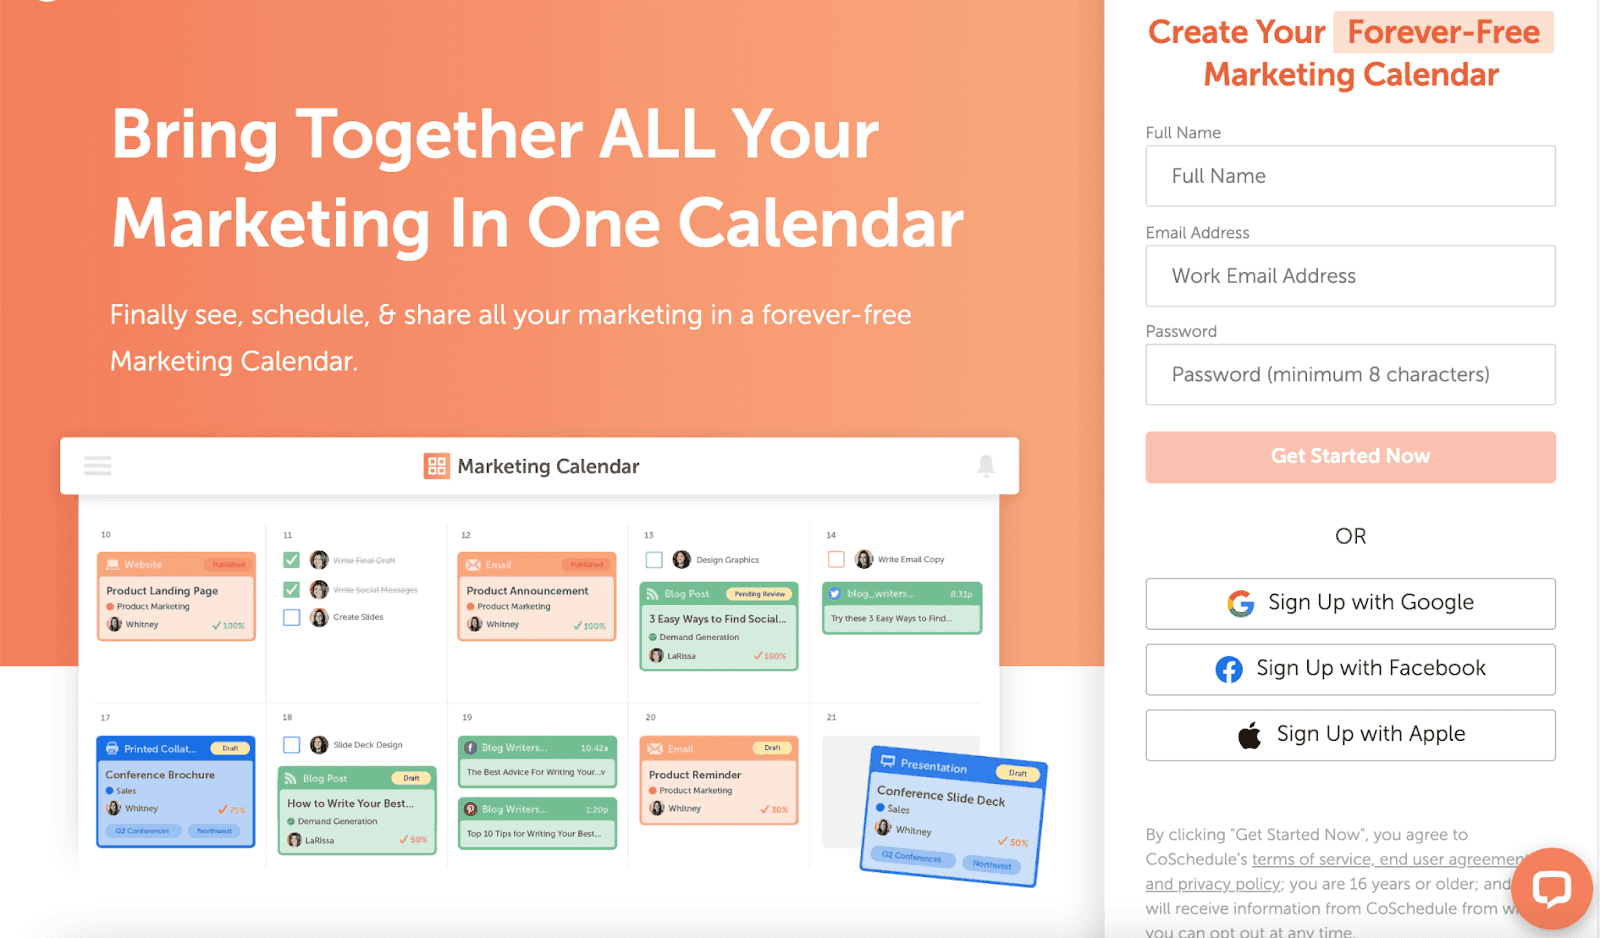 Marketing calendar by CoSchedule allows marketers to stay organized